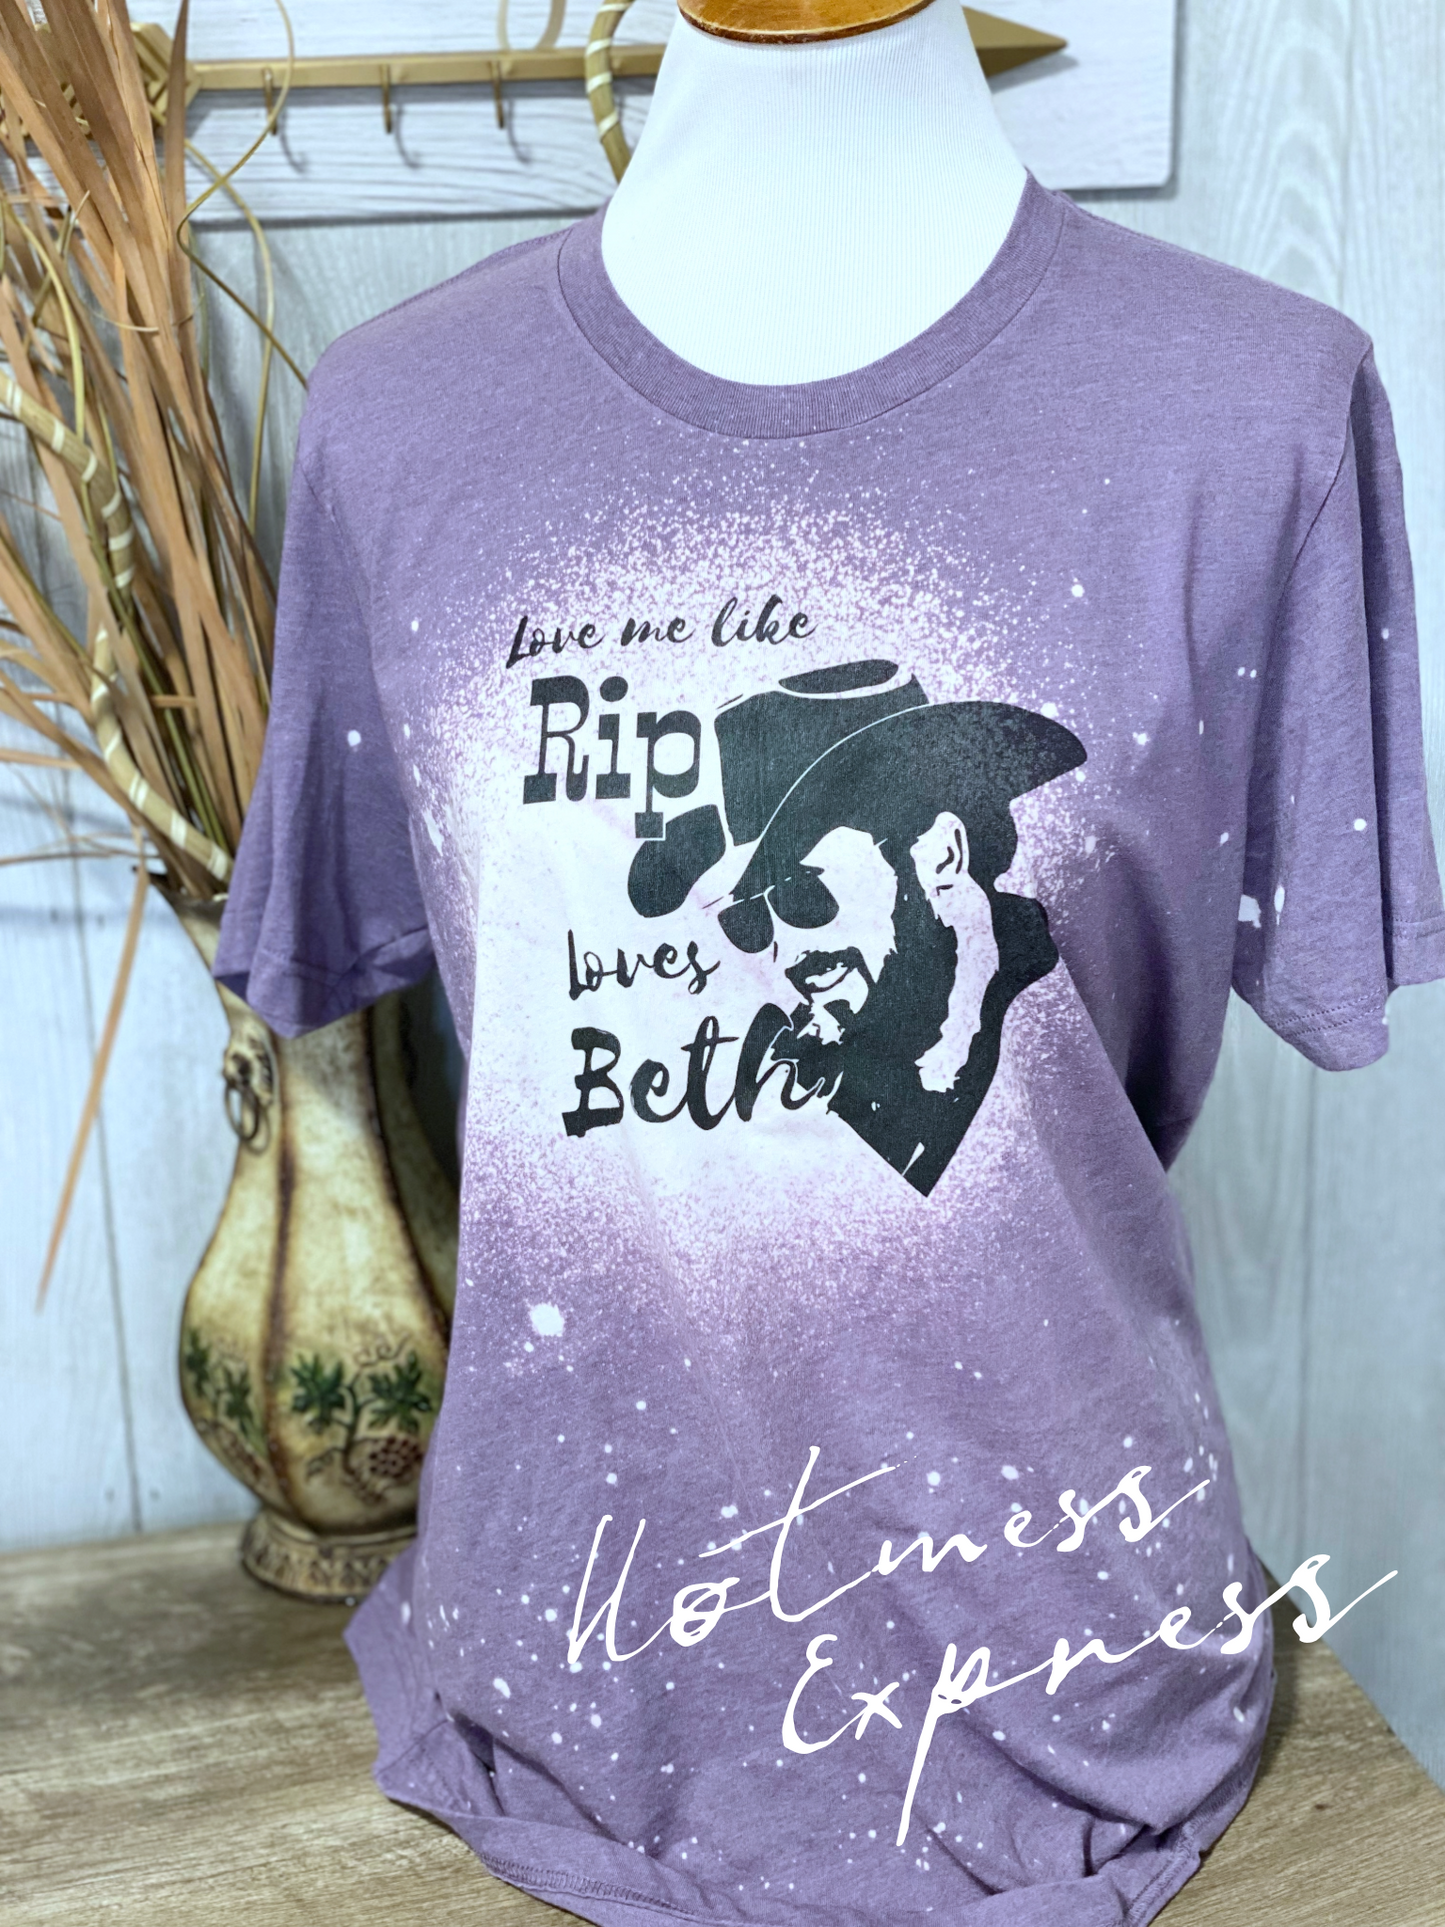 Love me like Rip Loves Beth Reverse Dyed Yellowstone Graphic Tee